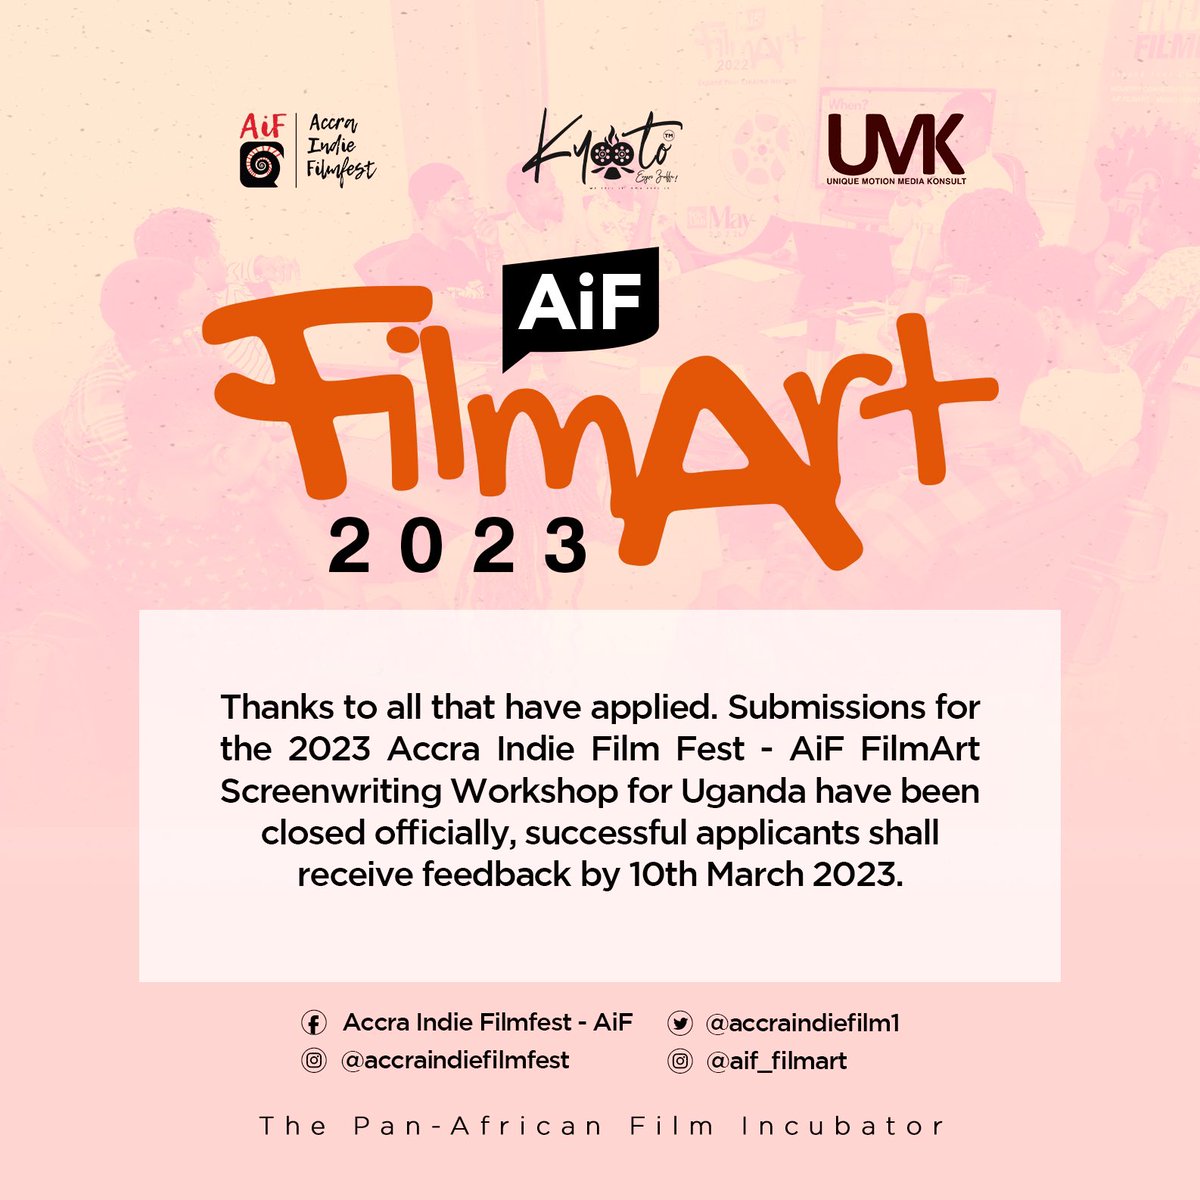 Screenwriting Workshop in Uganda for participants' application as part of this vear's edition of @accraindiefilm1 - AiF AiF FilmArt has officially closed.

Thank you for applying and the team will revert to all applicants by 10th March.

 #AiF23 #uganda #film #incubator